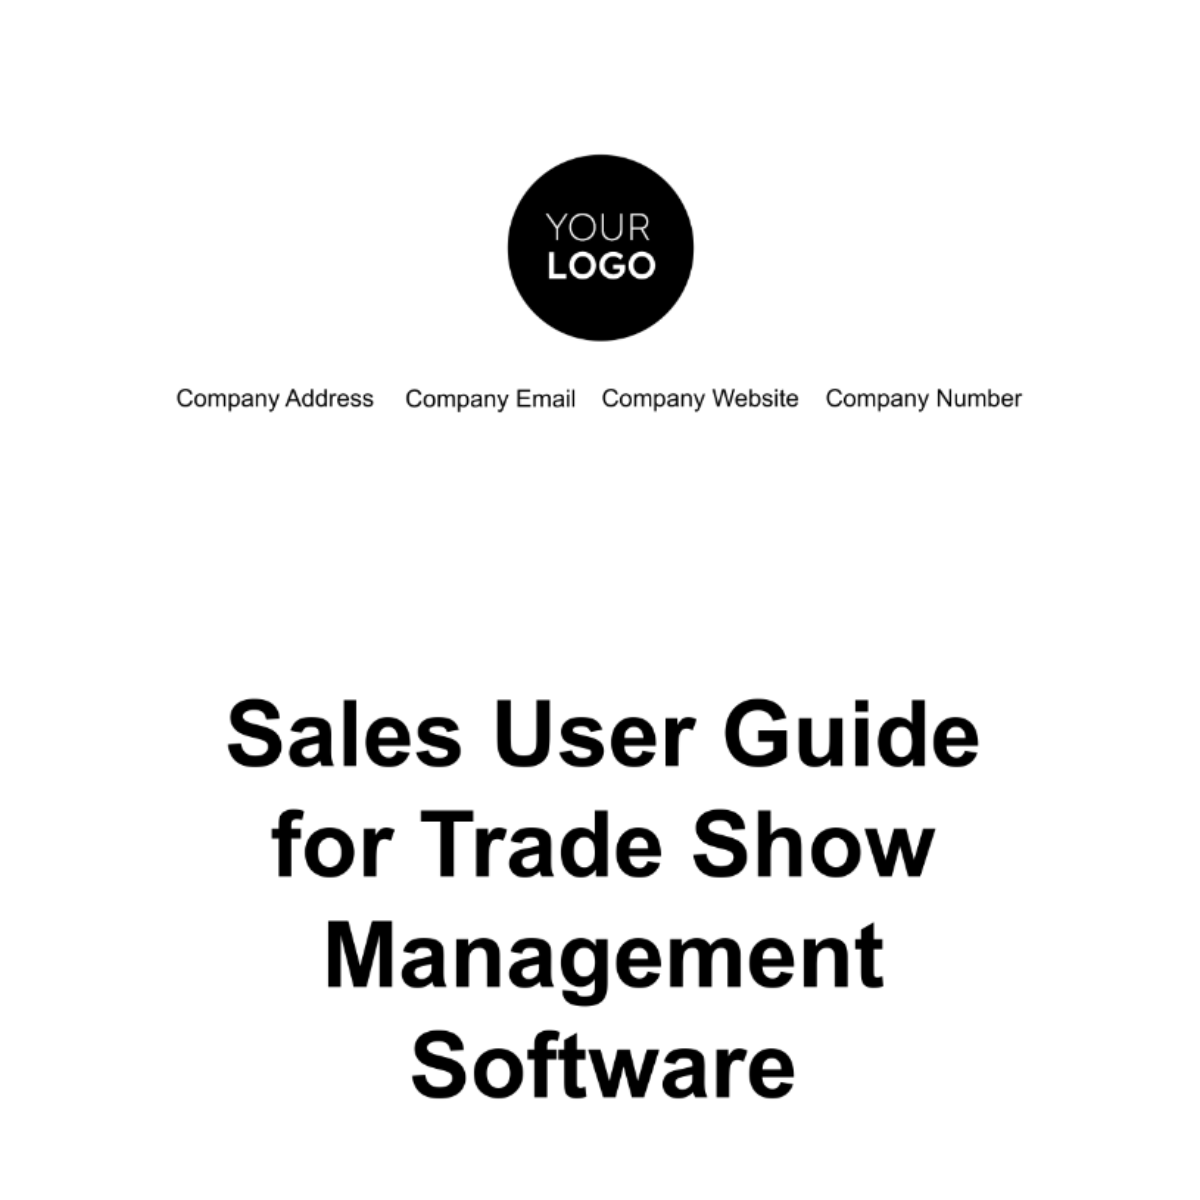 Sales User Guide for Trade Show Management Software Template